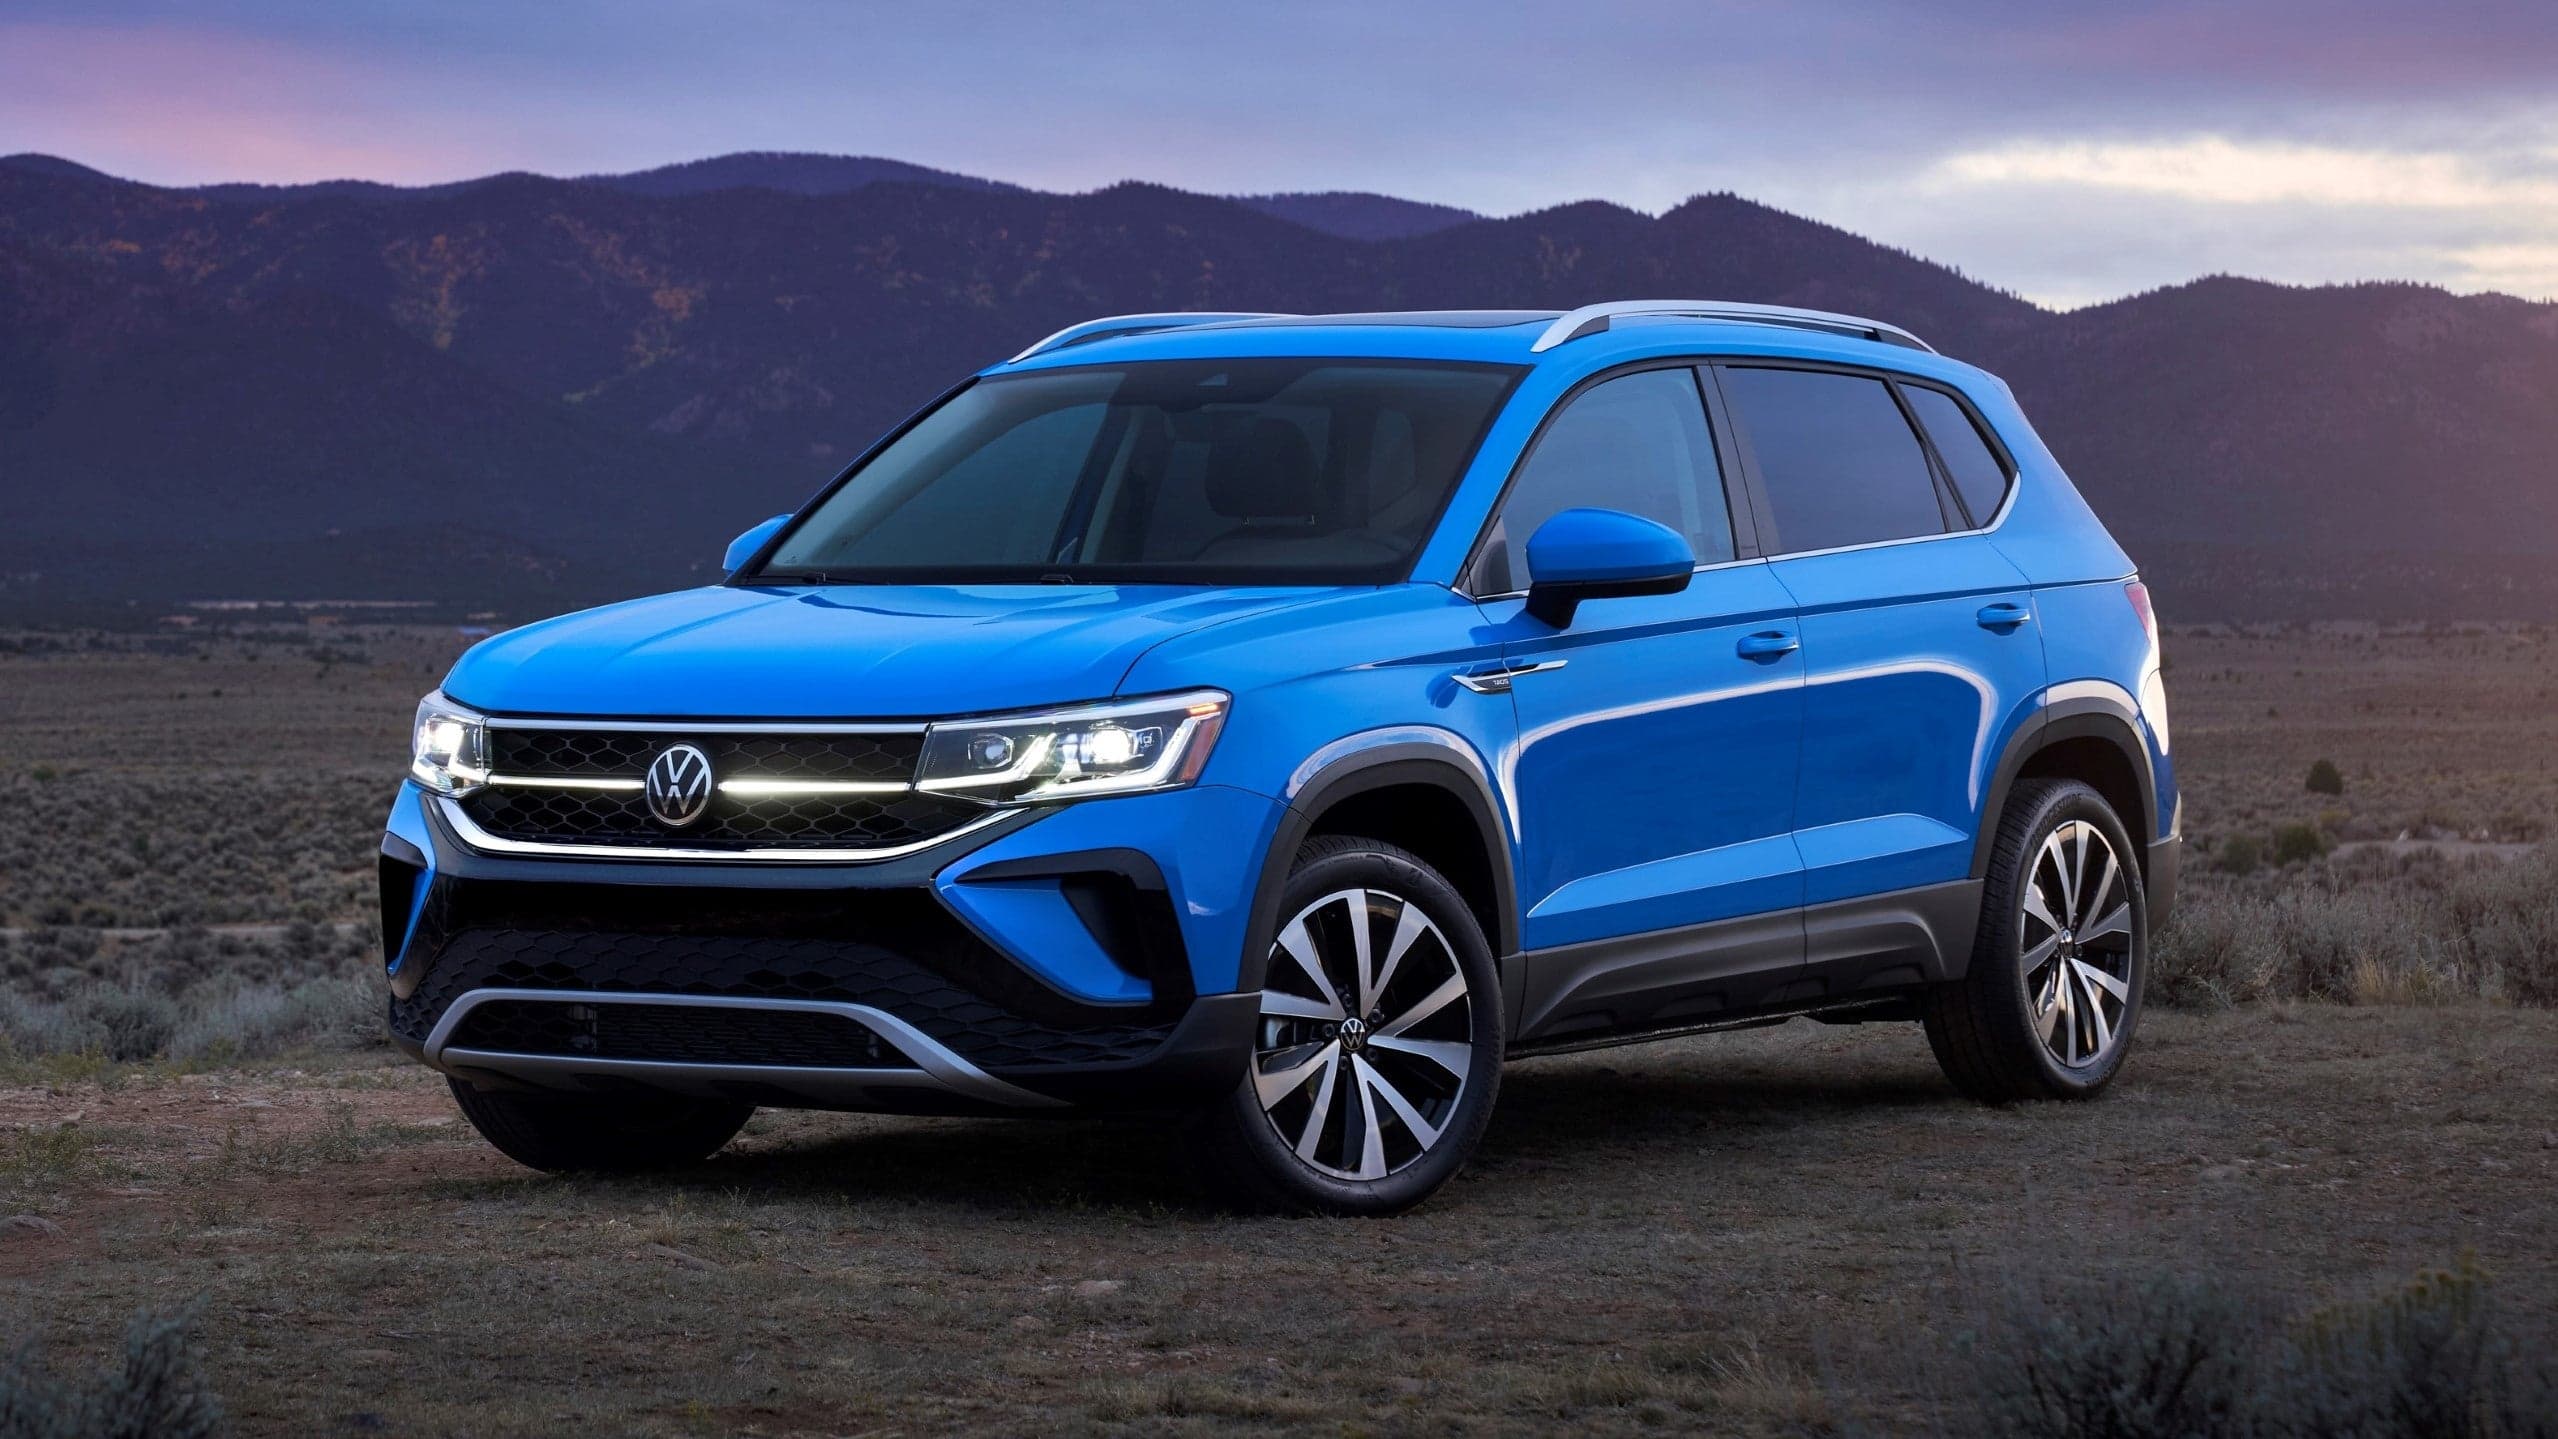 2022 Volkswagen Taos: Tiguan’s Little Brother Takes on the Honda HR-V and Toyota C-HR